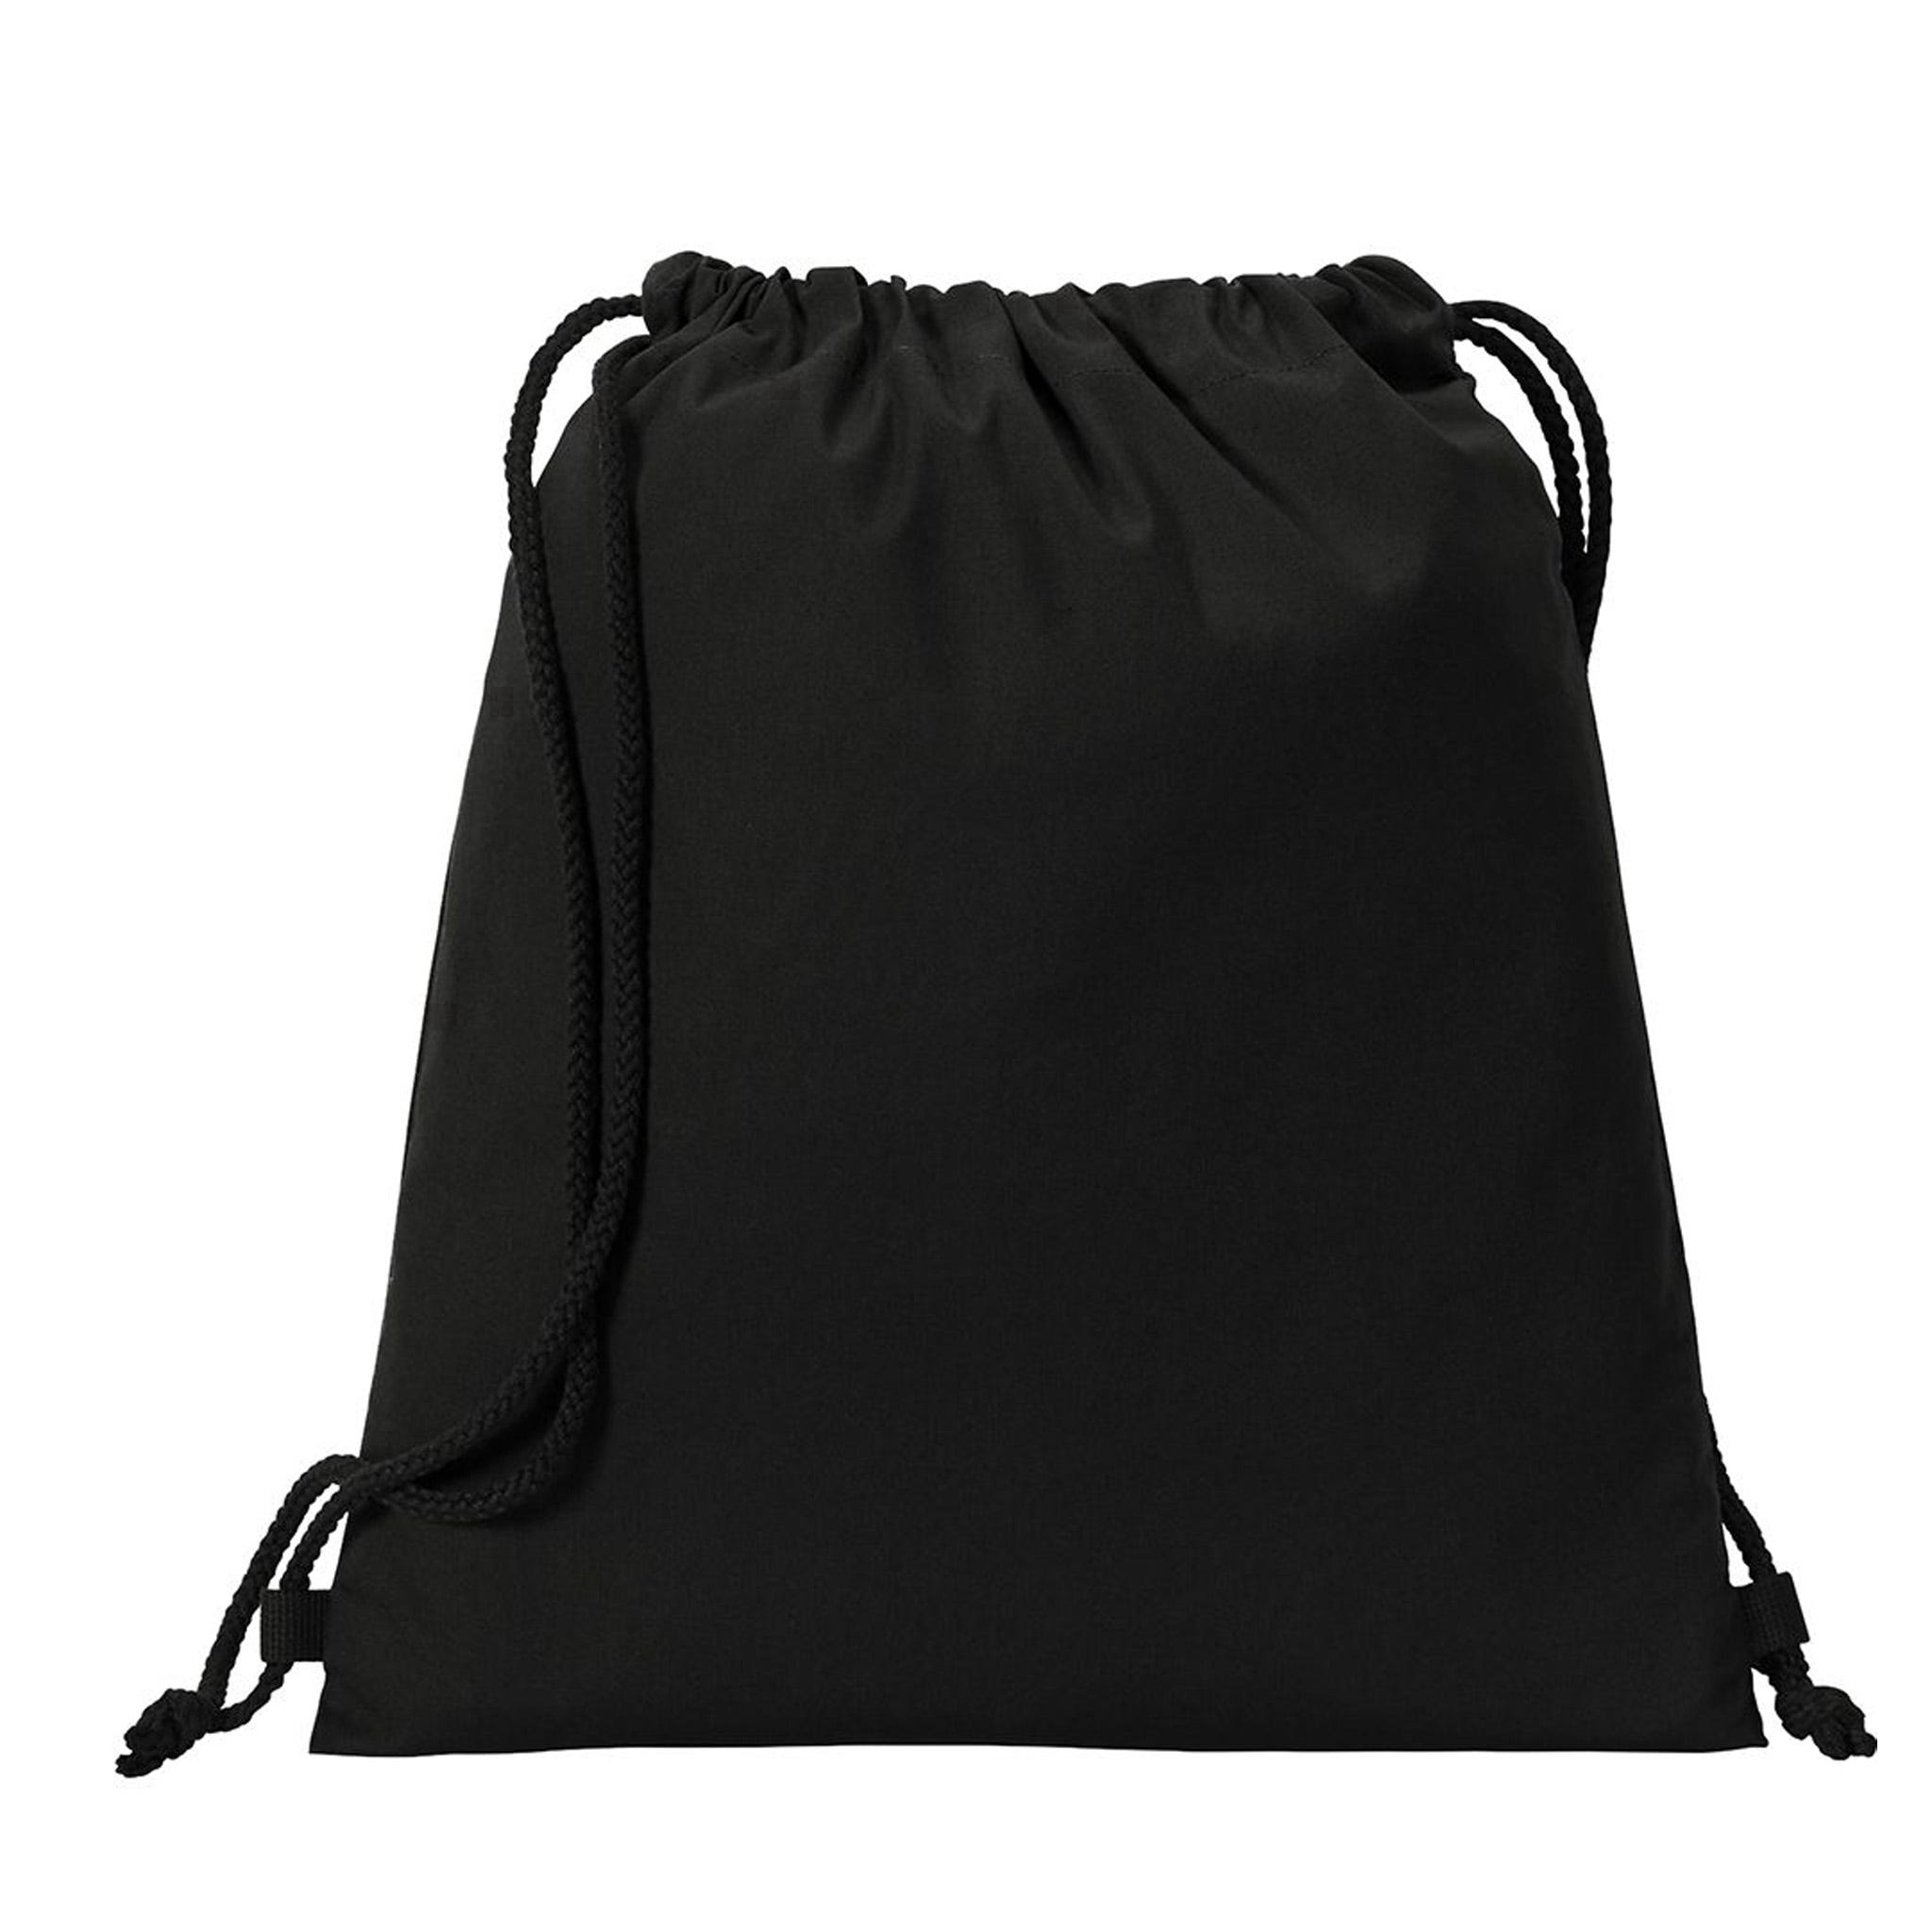 The Wolf Pack Drawstring Bag